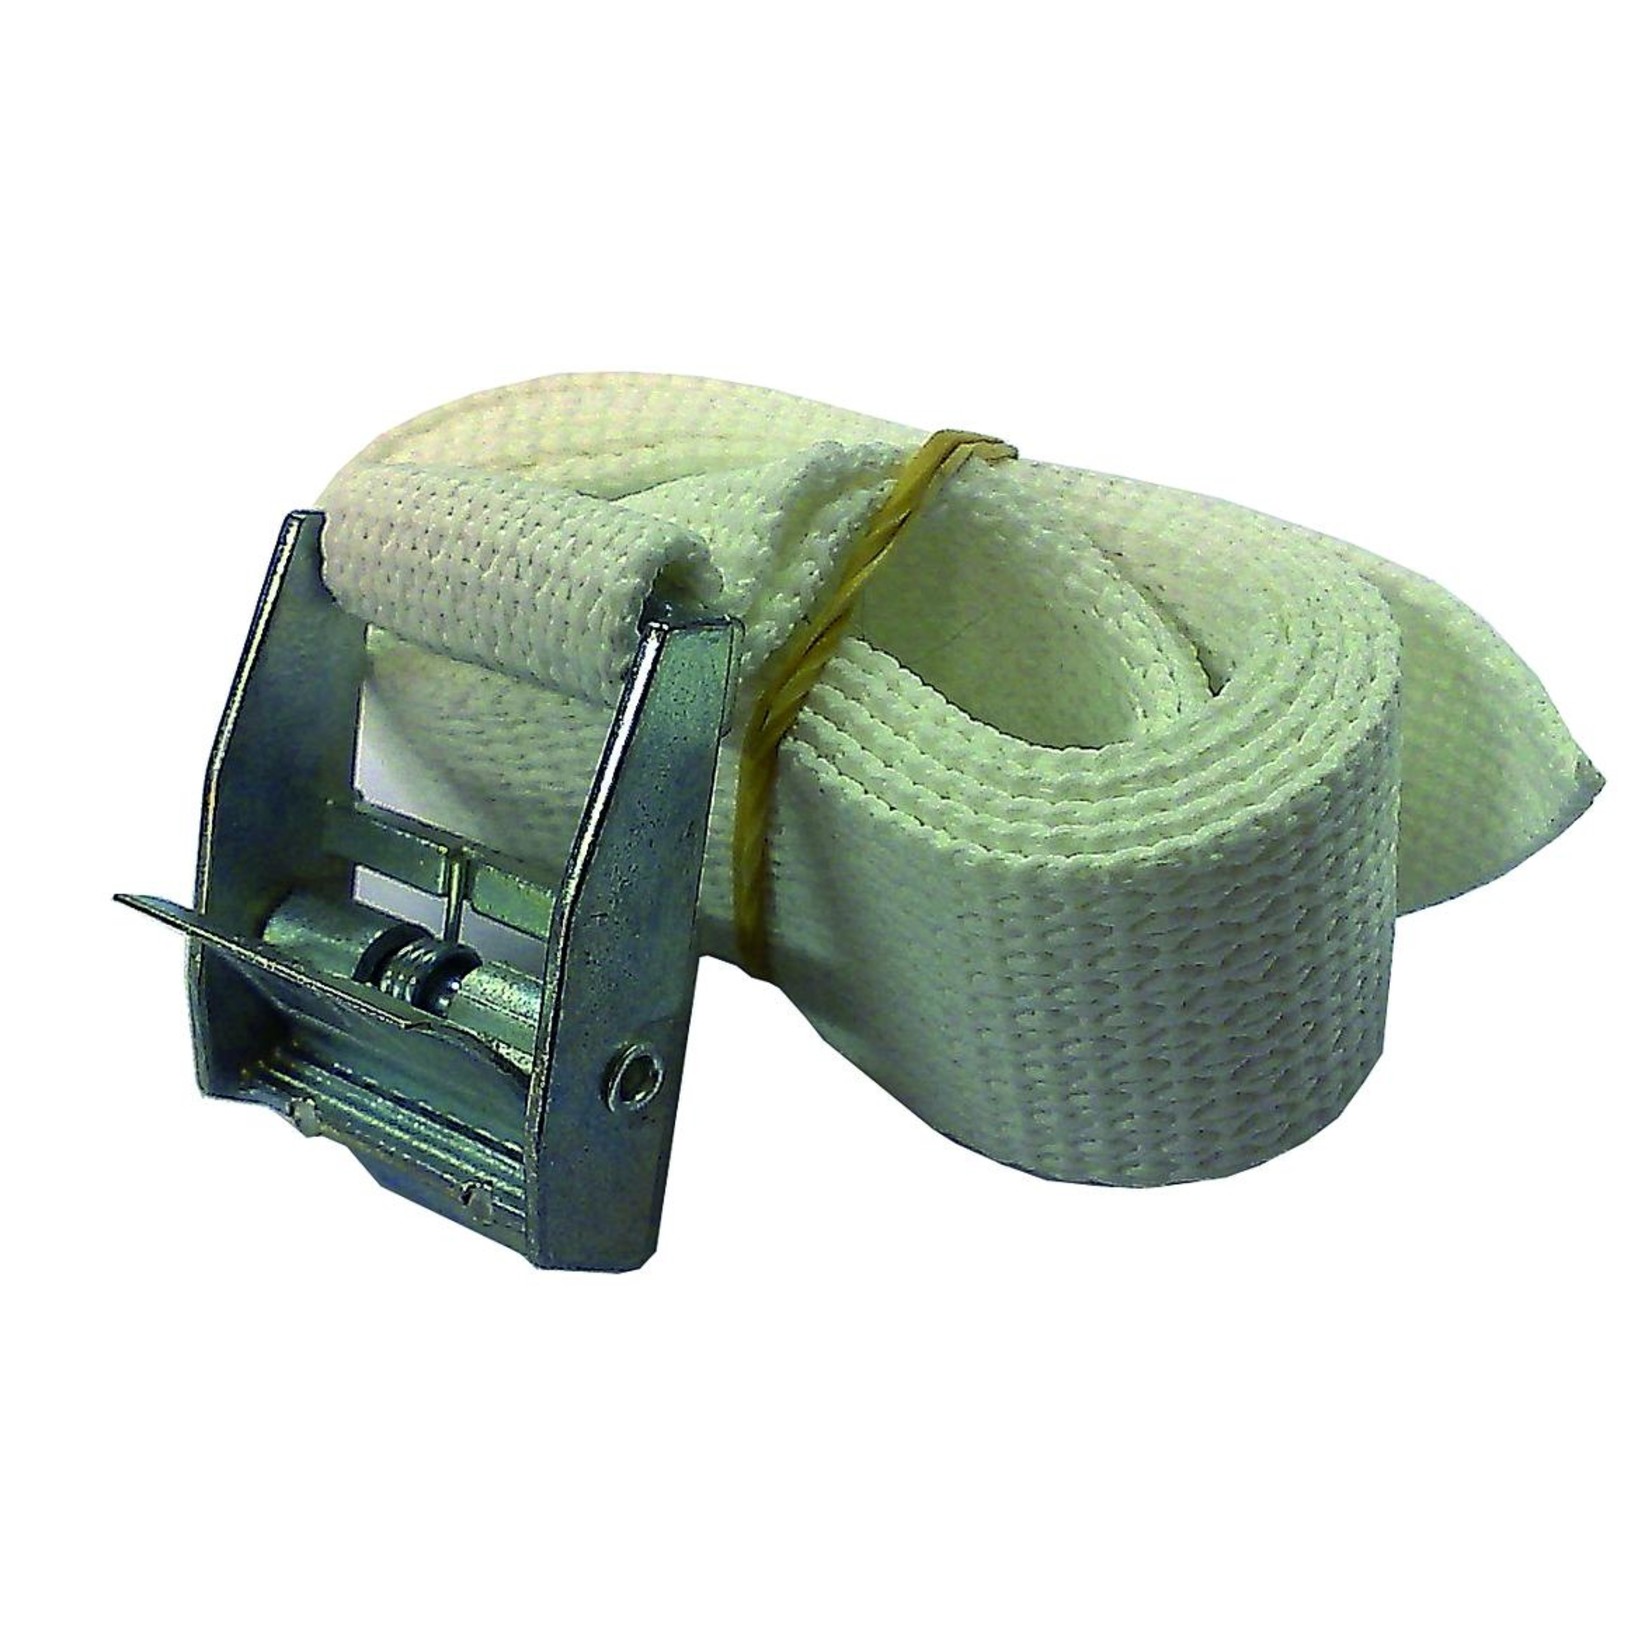 U-Rope General purpose strap with snap buckle. 25mm x 1 m. white